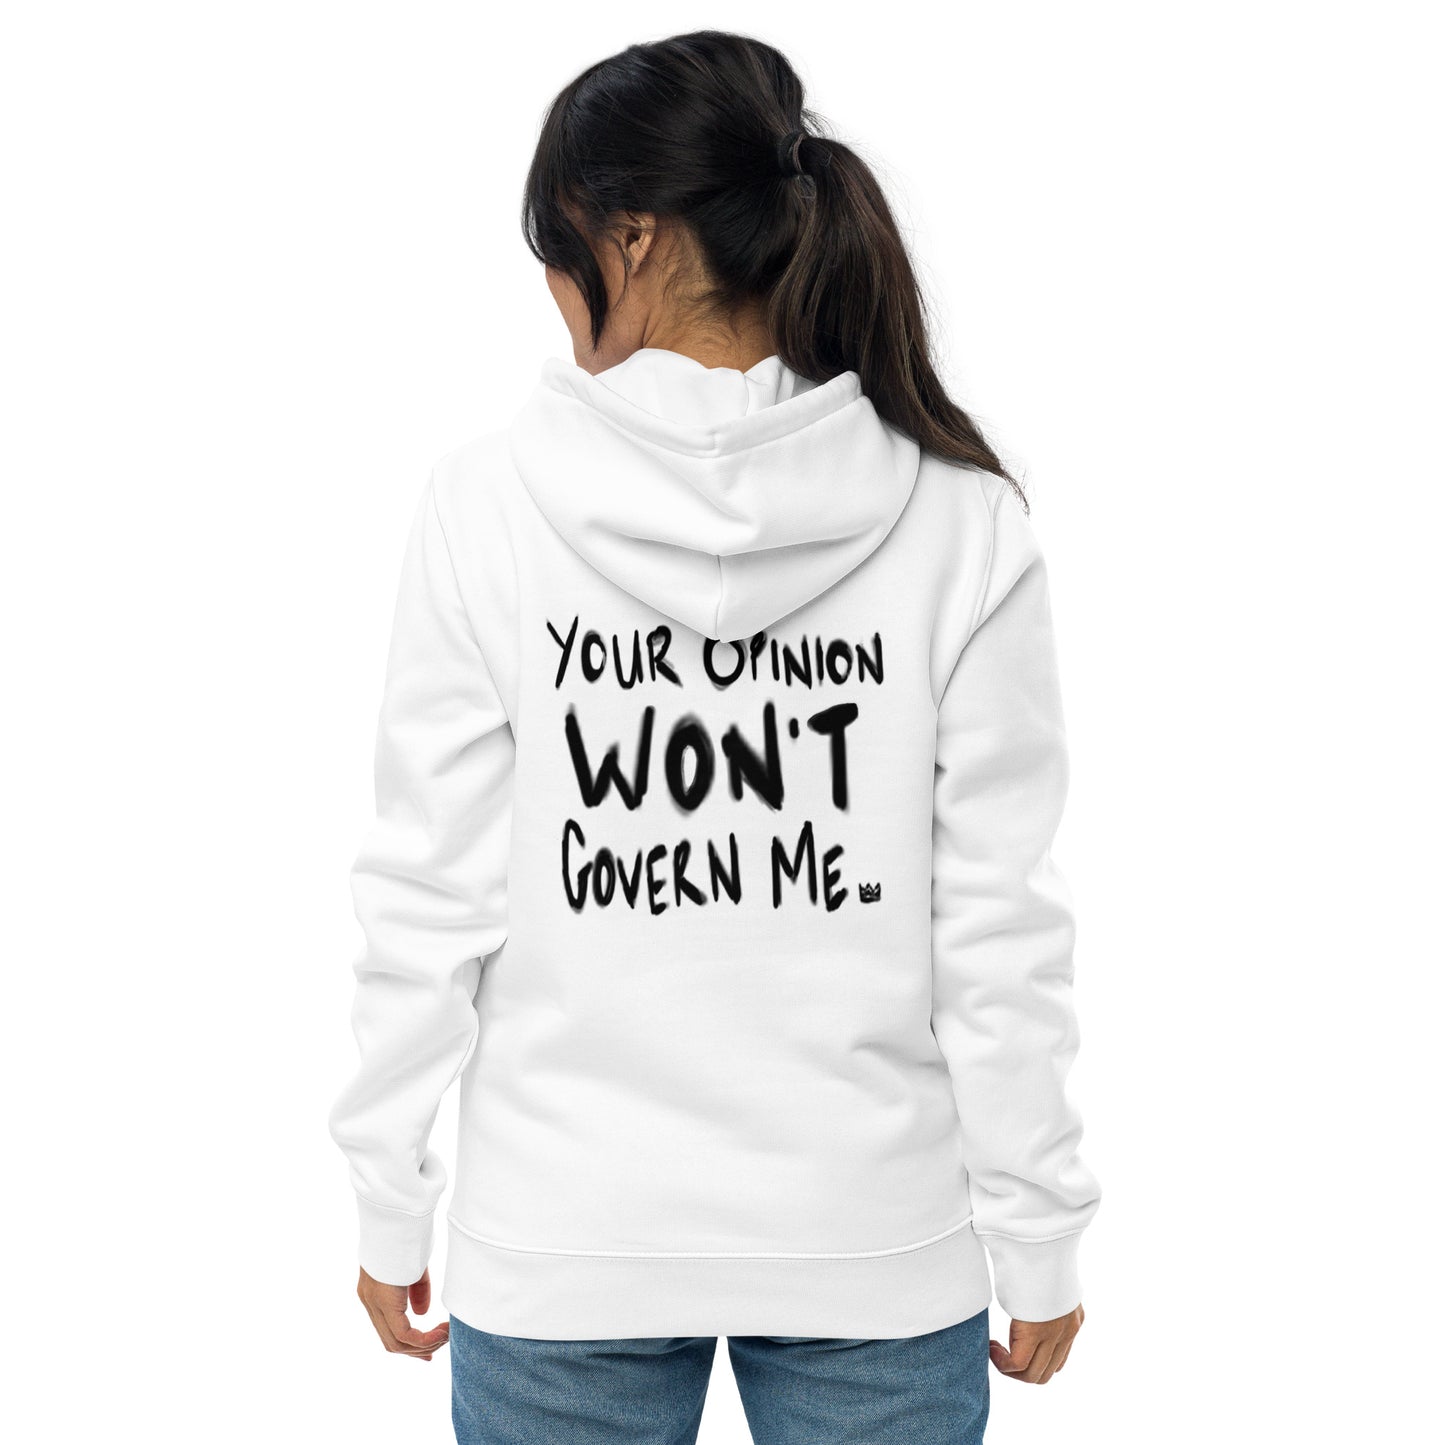 Your Opinion Won't Govern Me Hoodie